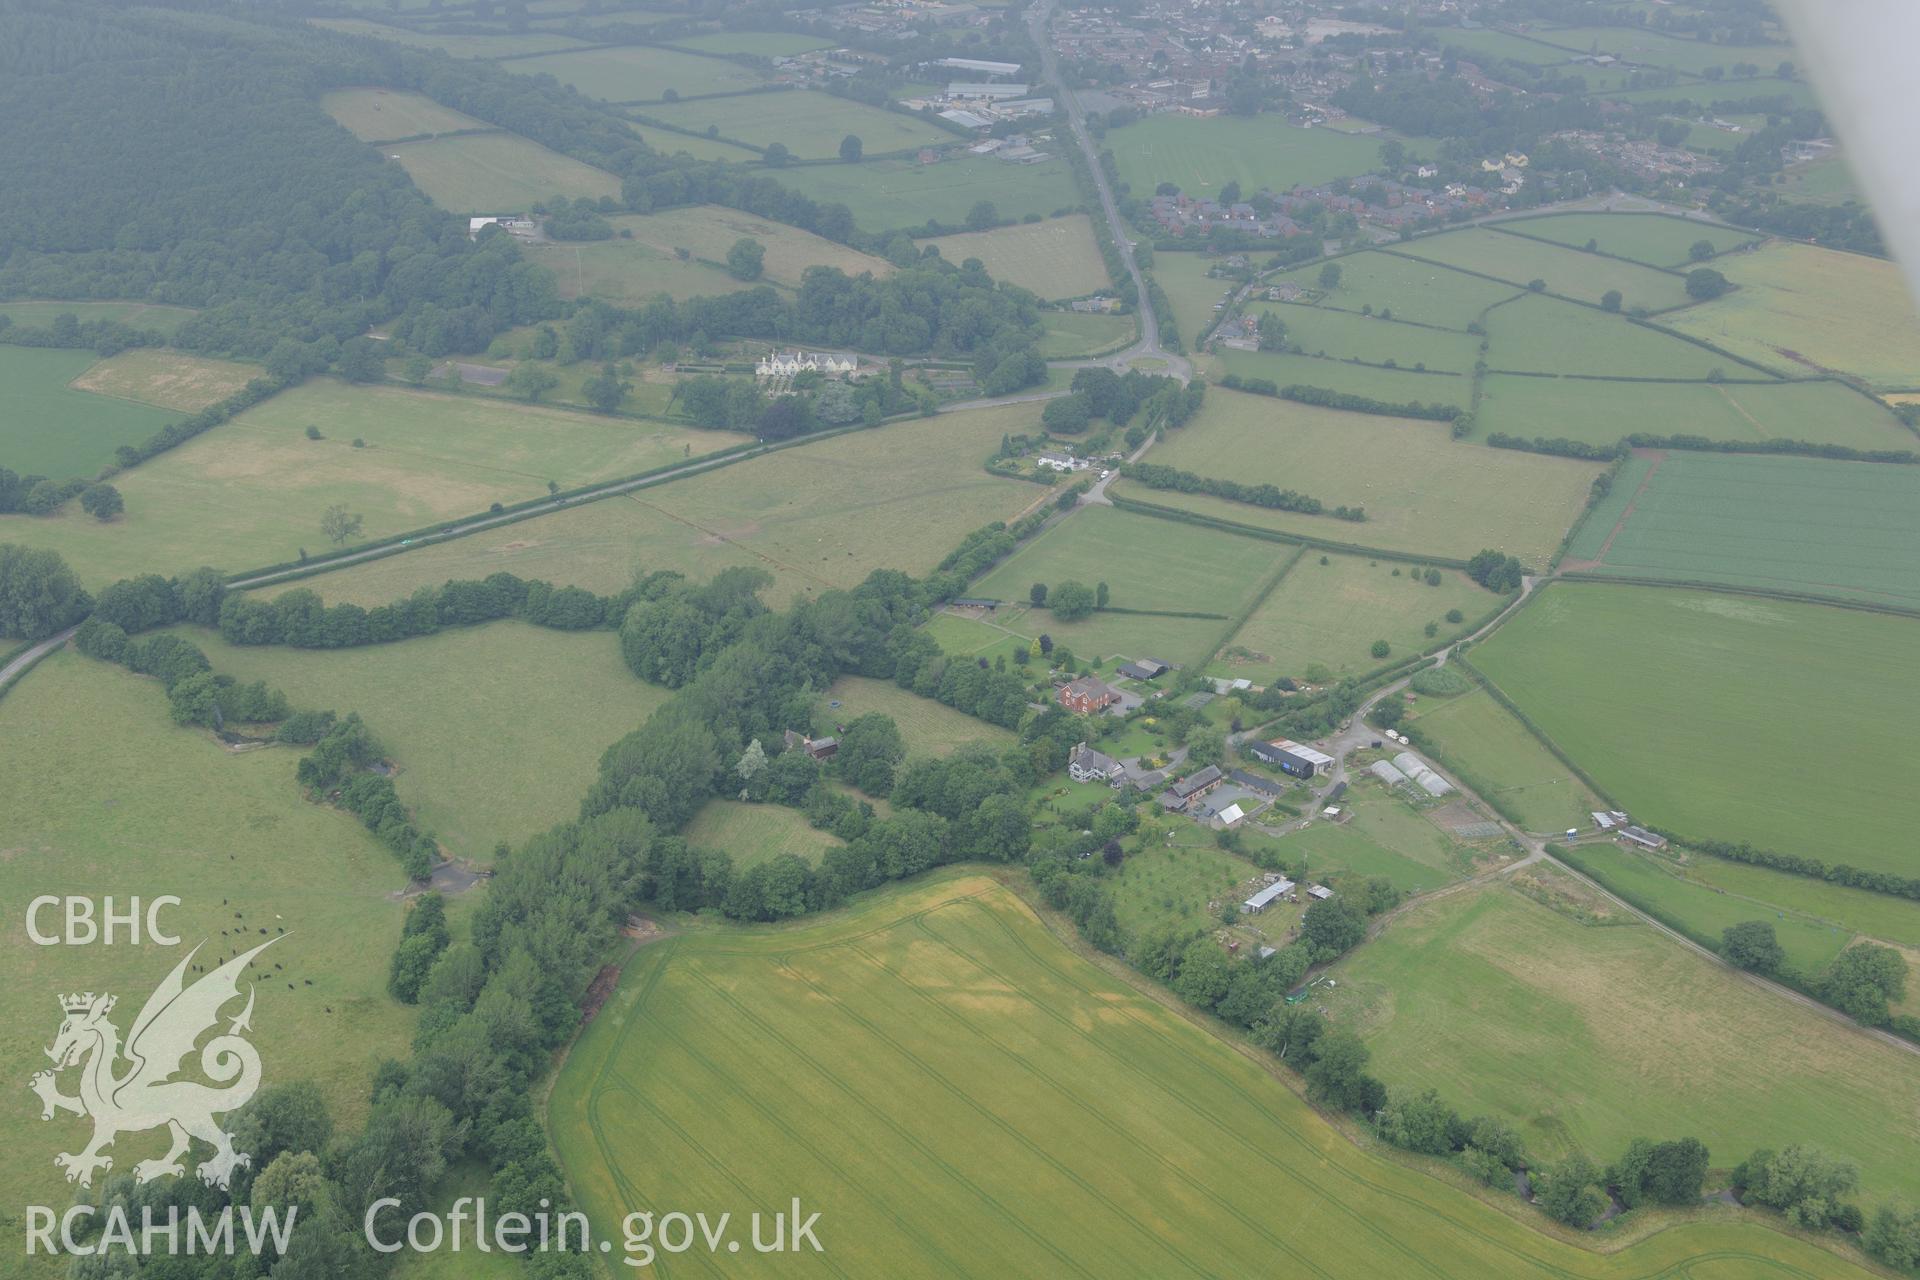 Wegnall farmhouse with the Wegnall cropmarks in the field below and the town of Presteigne in the distance. Oblique aerial photograph taken during the Royal Commission?s programme of archaeological aerial reconnaissance by Toby Driver on 1st August 2013.